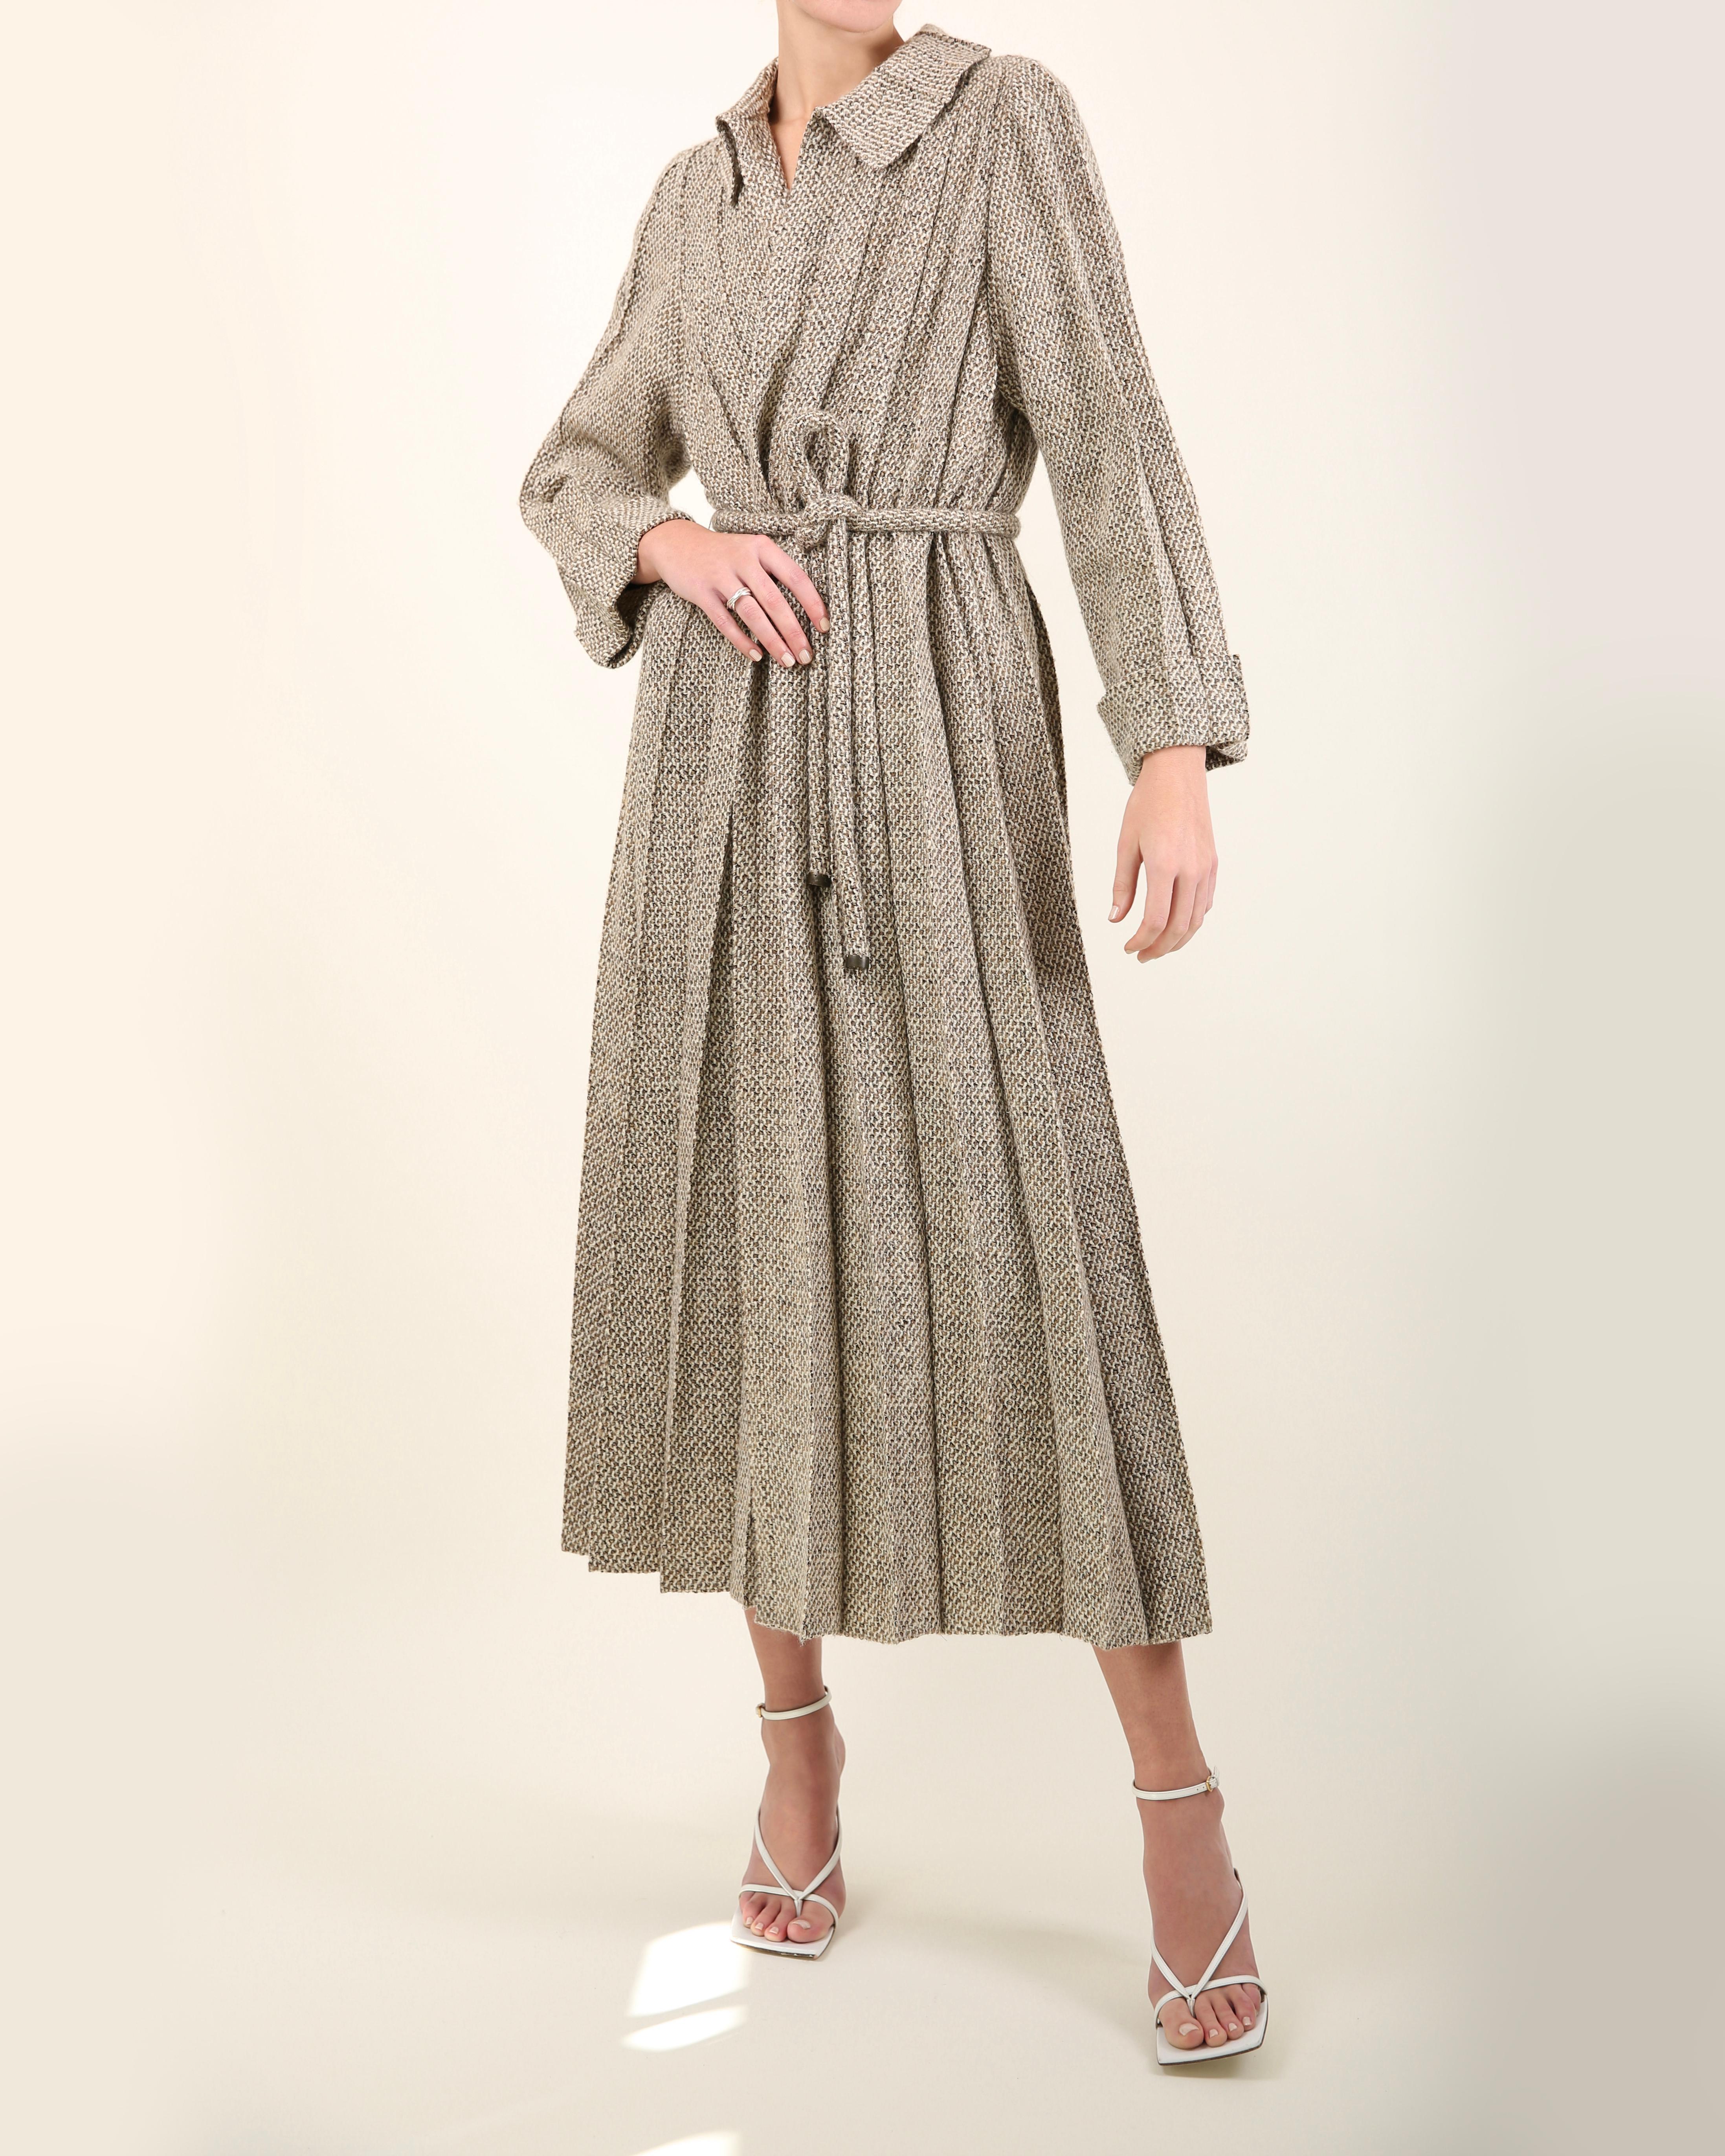 Chanel Fall 1998 brown & white tweed wool long pleated maxi jacket dress coat   In Excellent Condition For Sale In Paris, FR